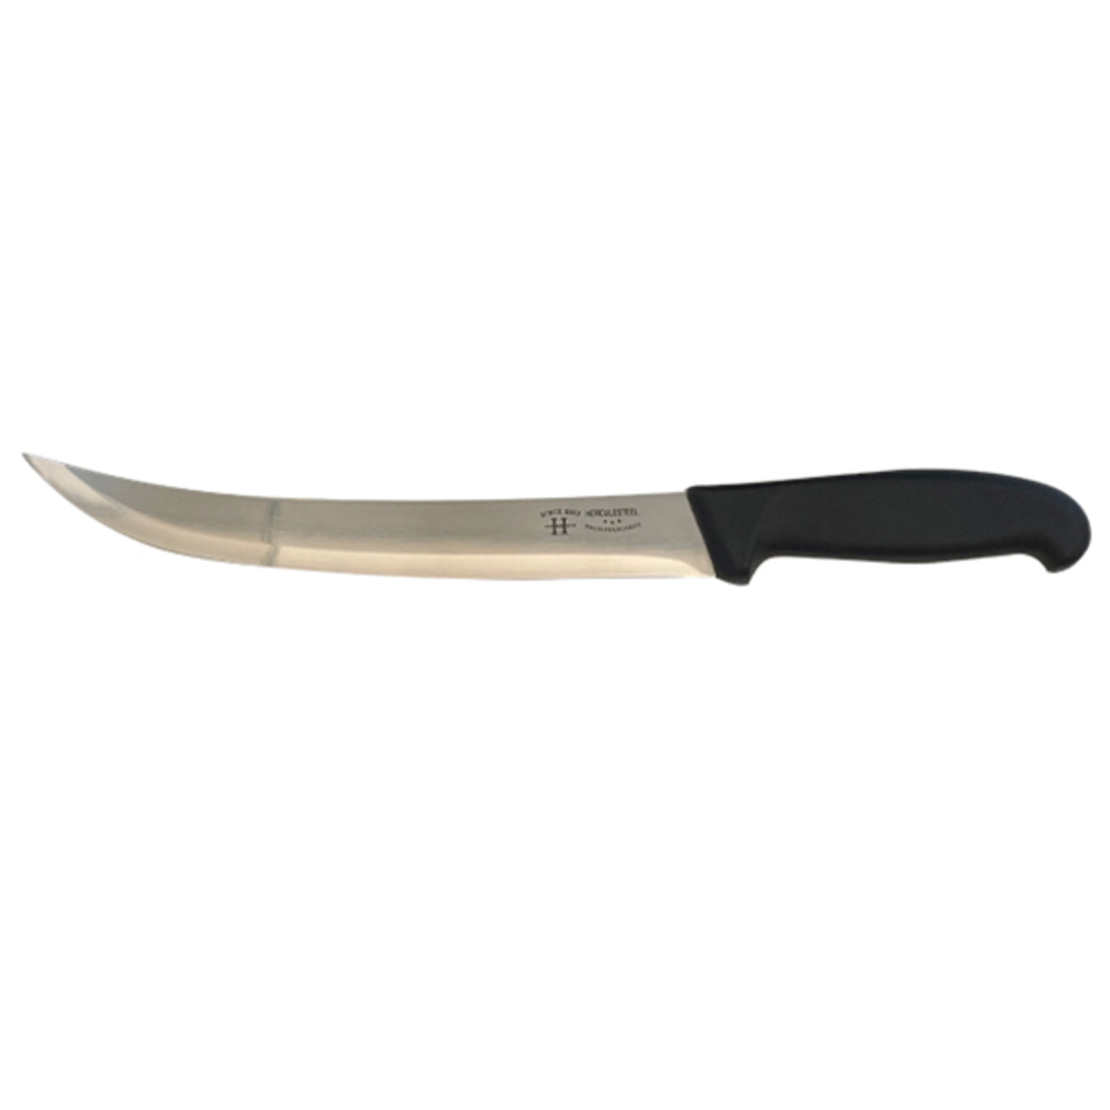 38 cm butcher chef knife for cutting meat and steaks curved head herculesteel classic